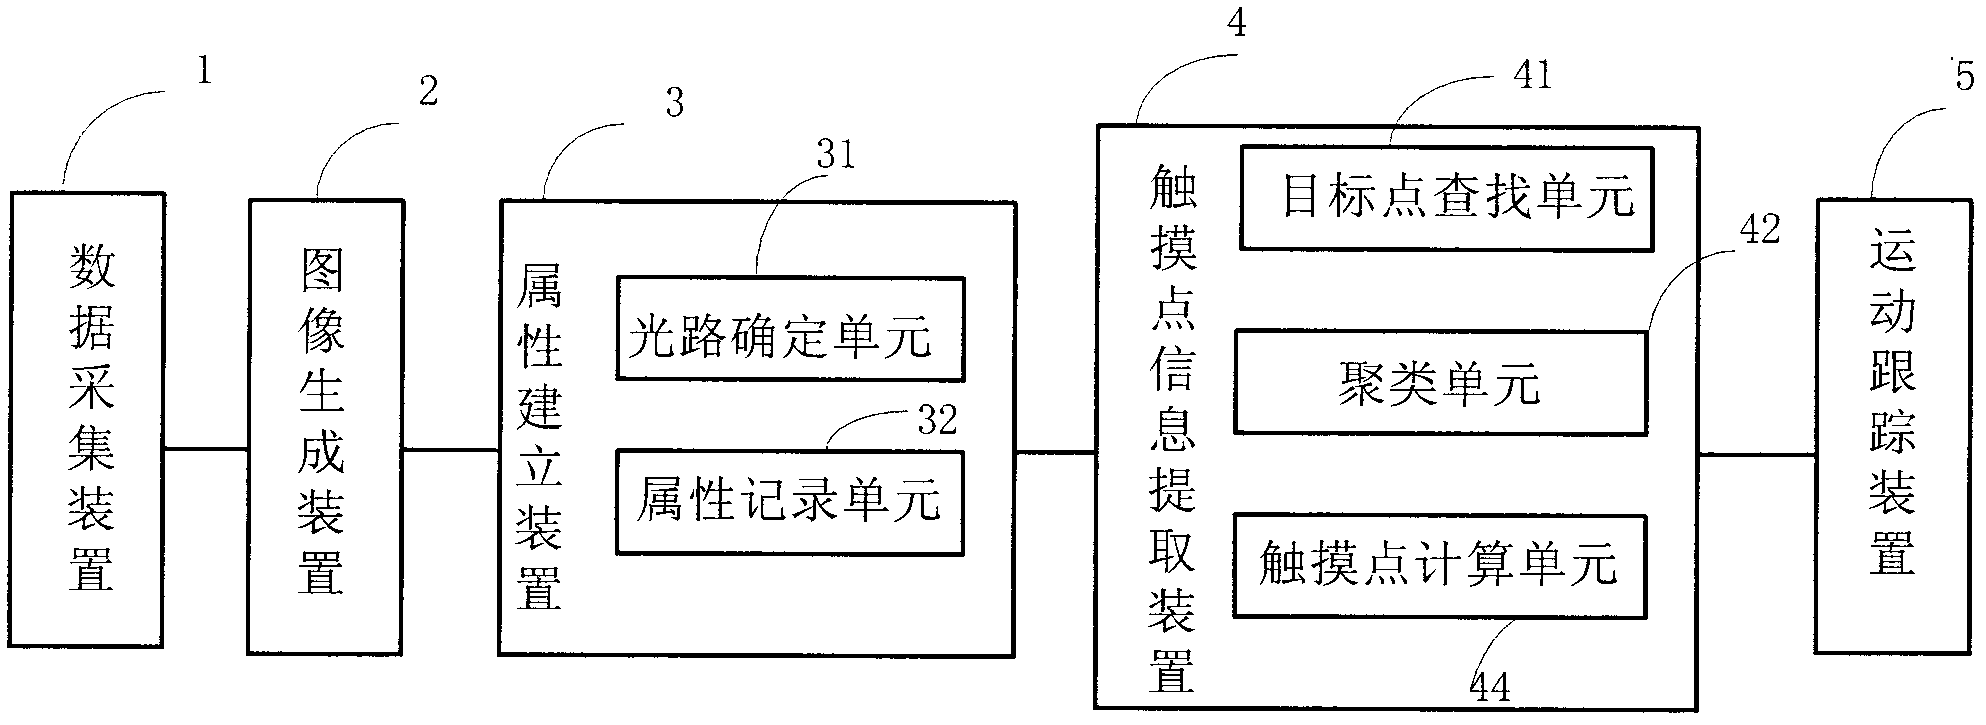 Multipoint identification method and system for infrared touch screen